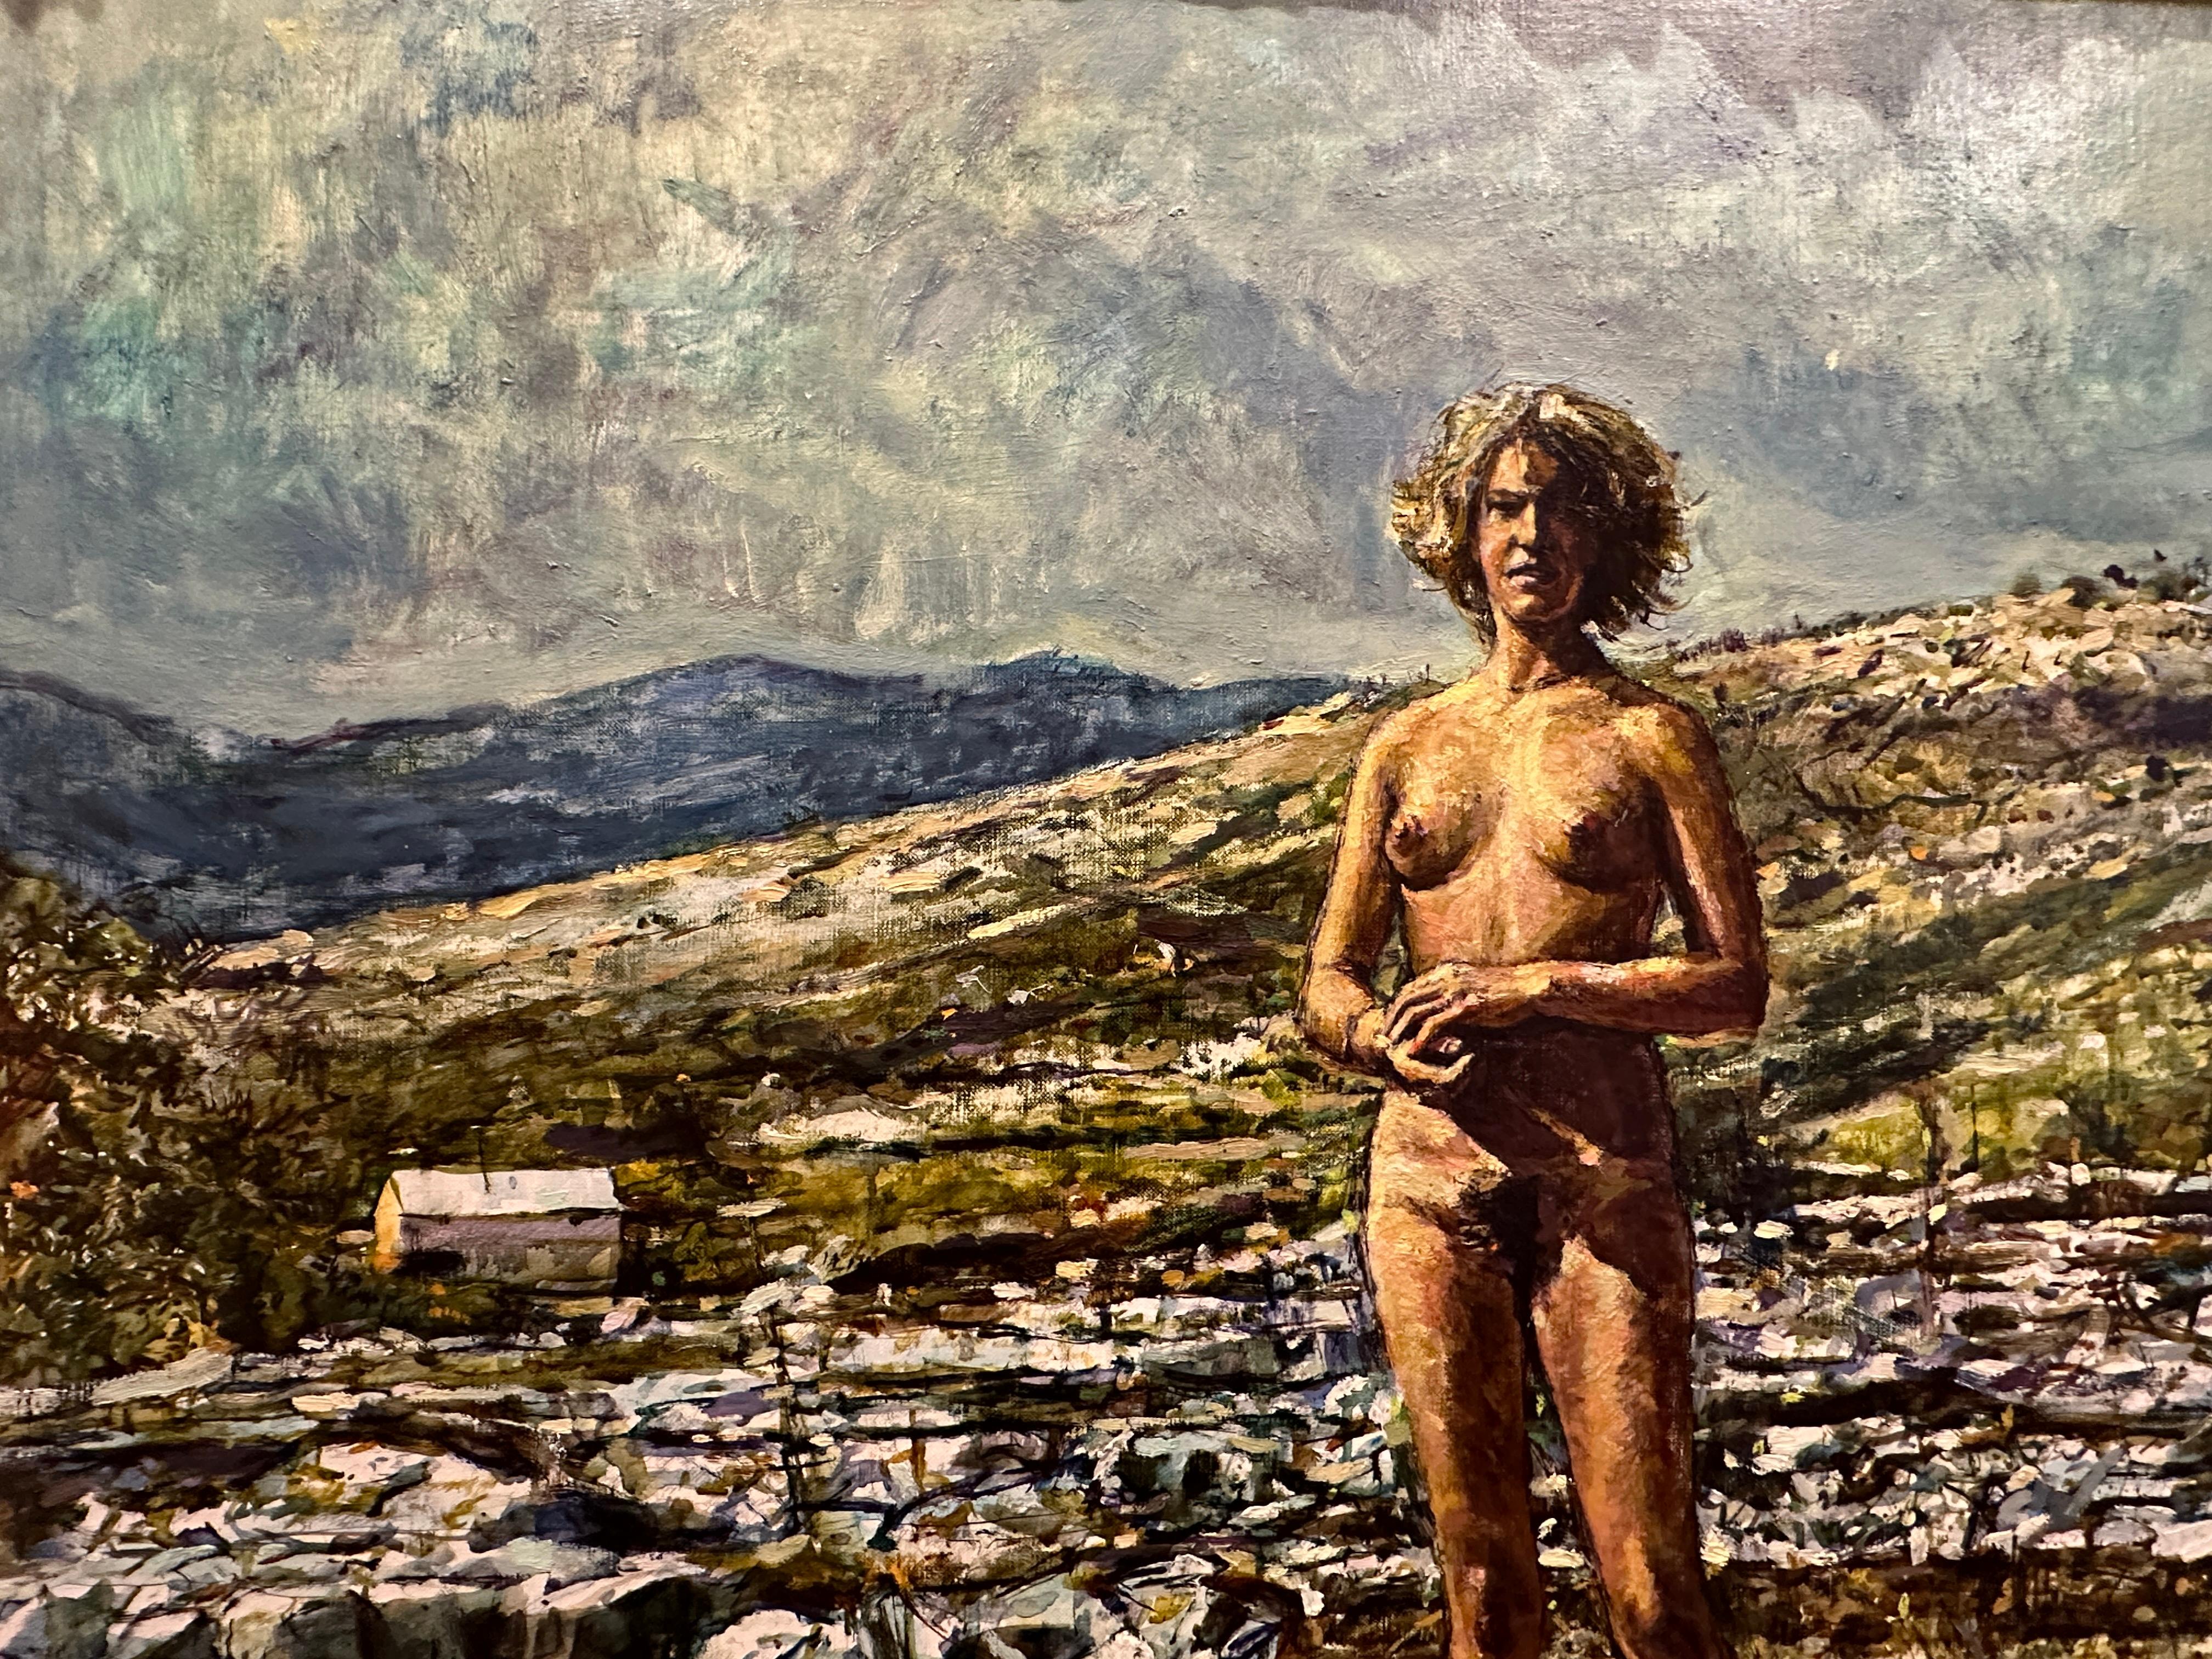 The painting reveals a nude woman, her aura exuding self-assurance. She stands upright on the rugged terrain of a rocky mountain. Her curly hair freely frames her face. The work is elegant, devoid of any hint of eroticism. Instead, it's a